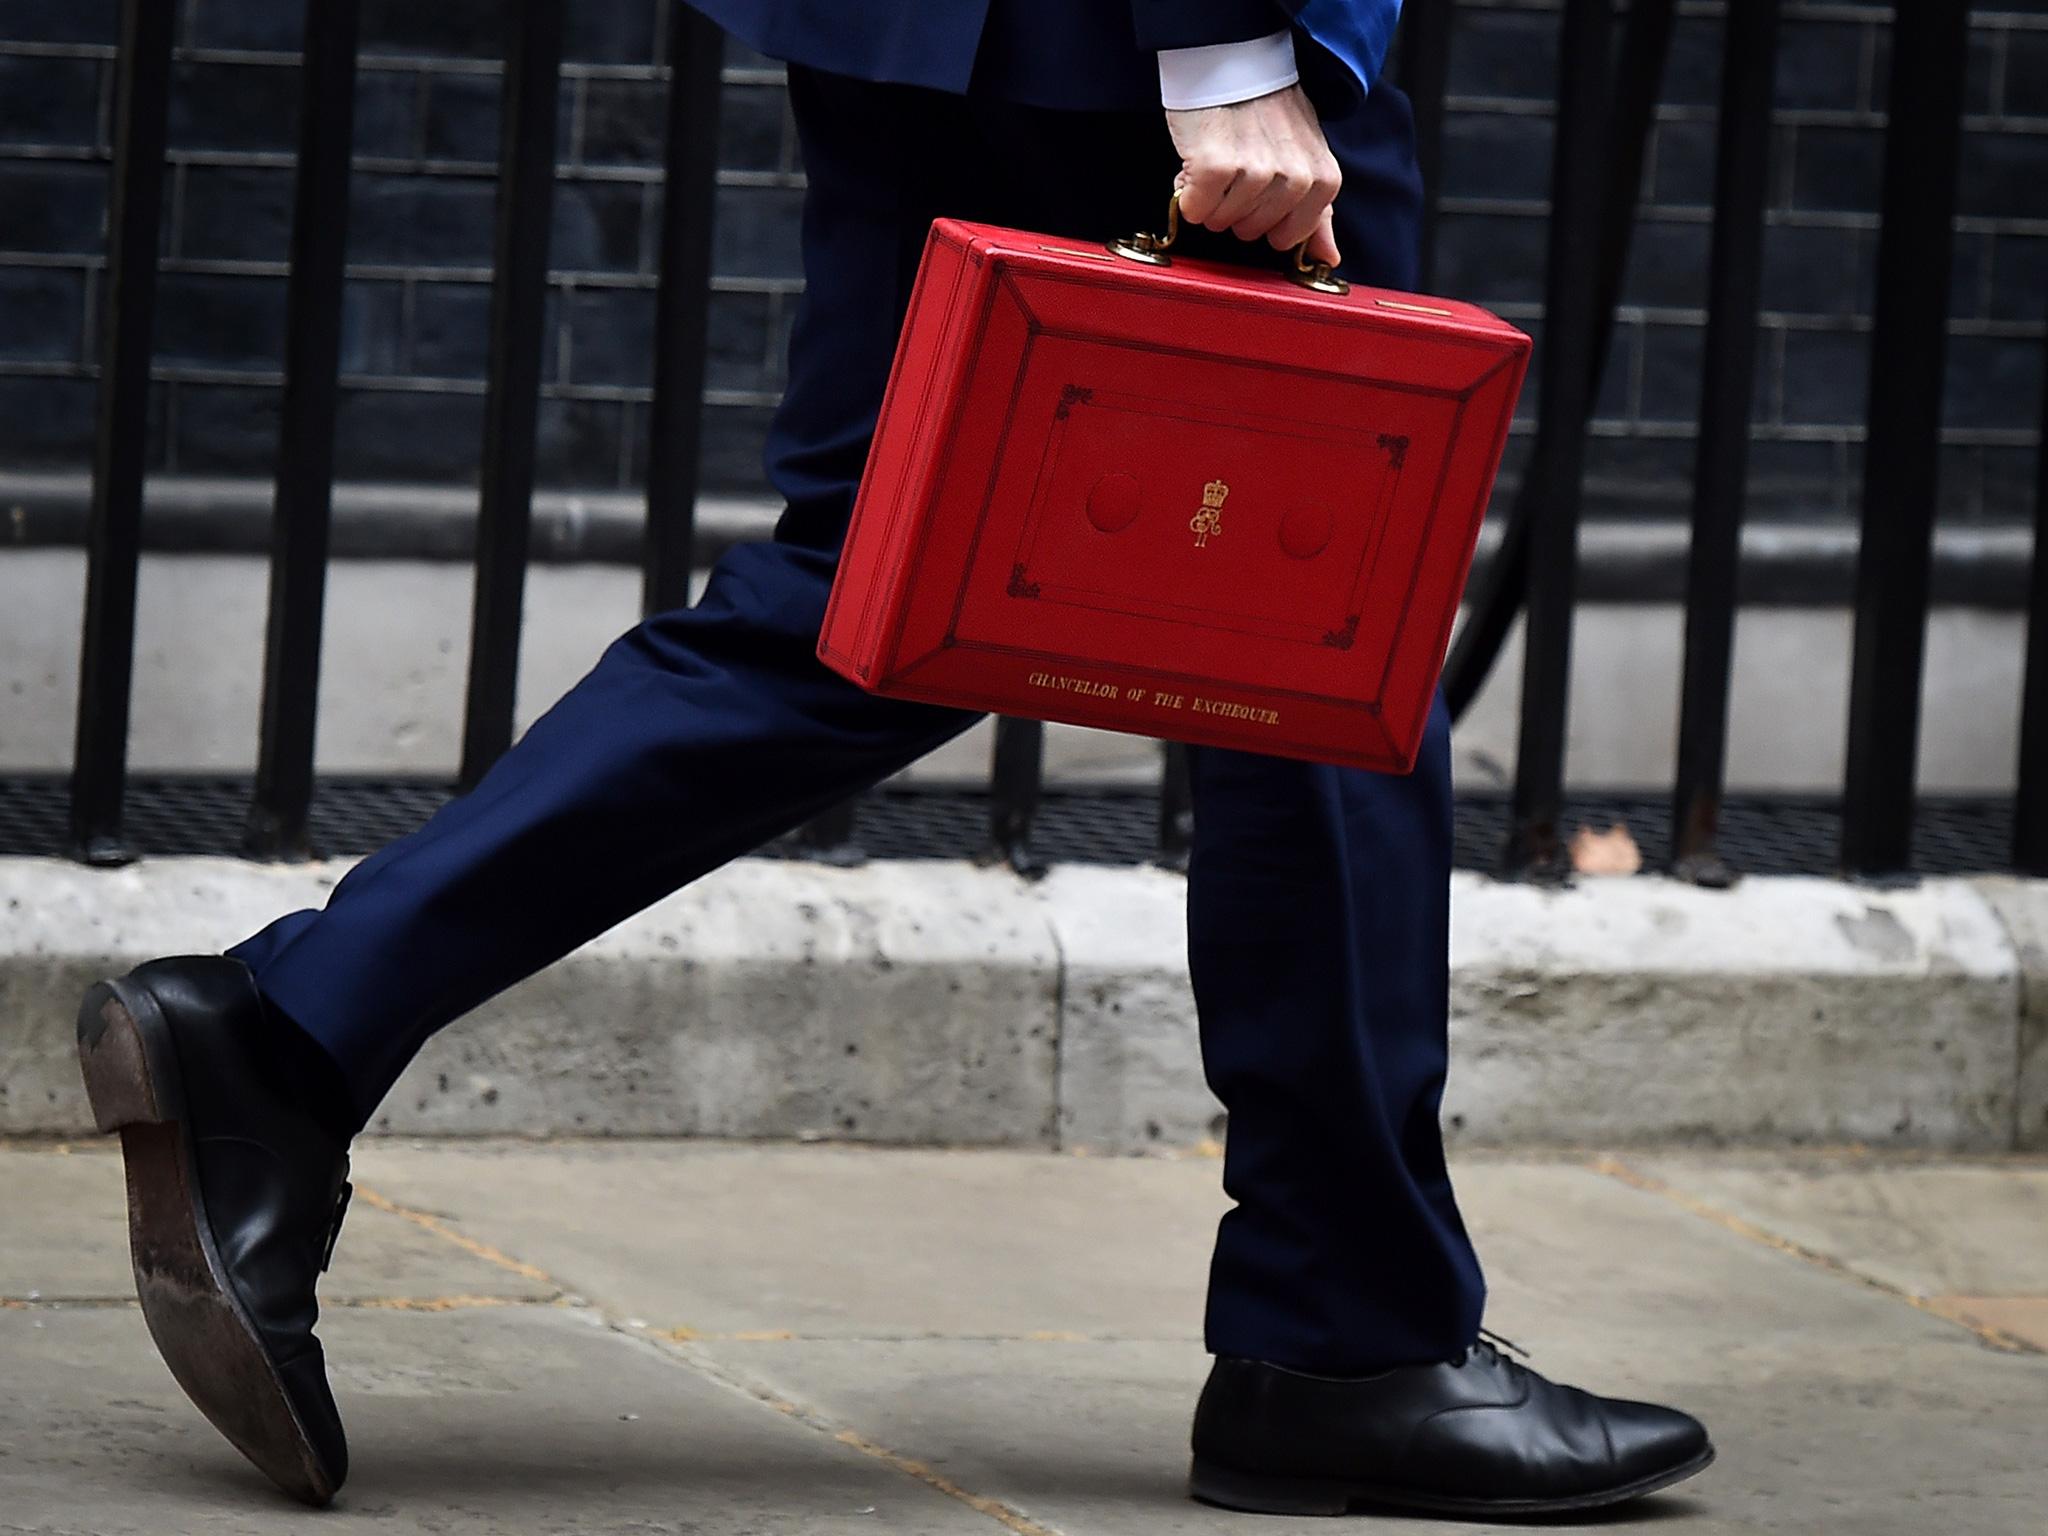 How will the contents of the red Budget box affect British people?